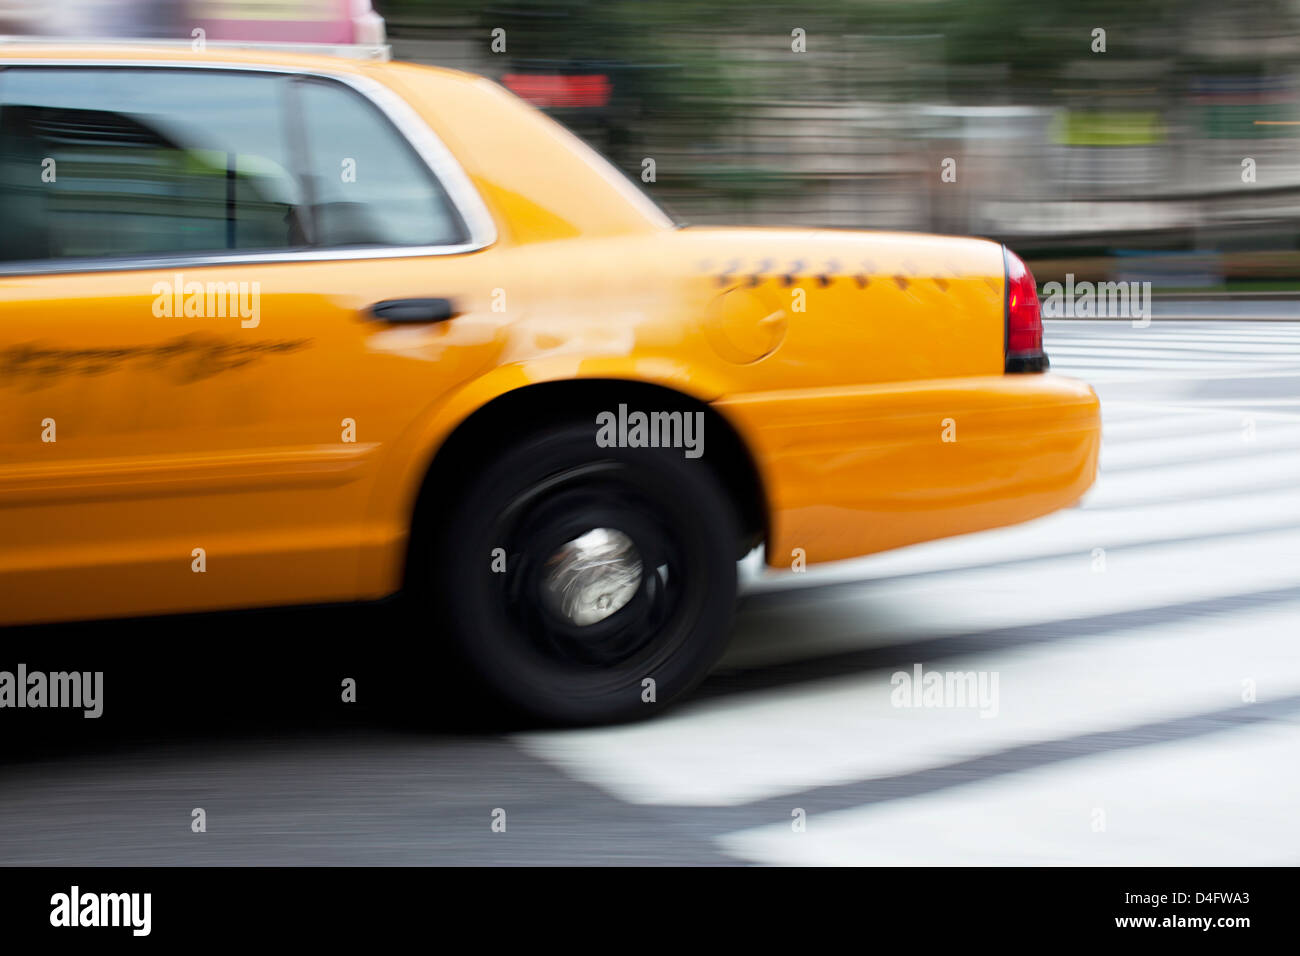 Blurred view of taxi on city street Stock Photo